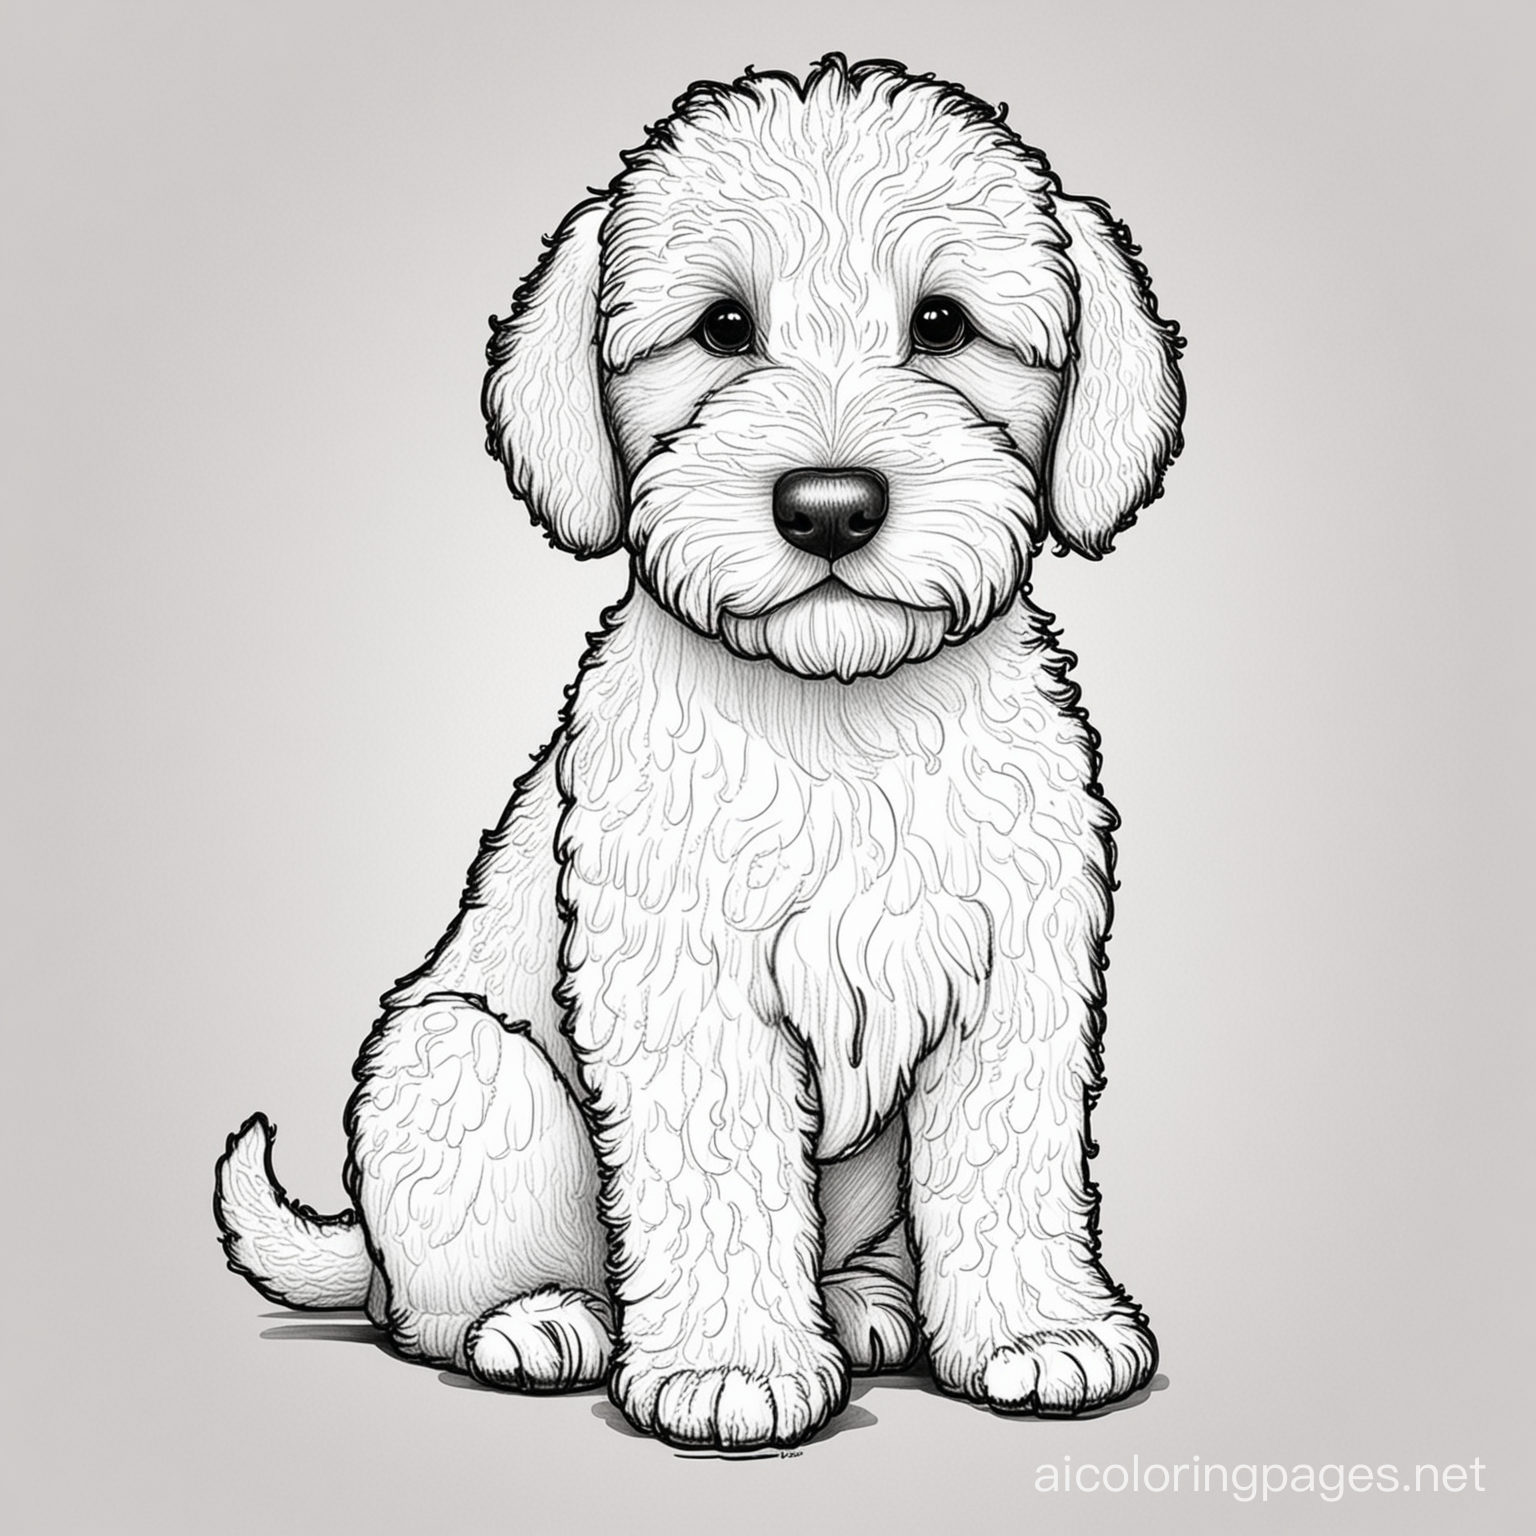 Mini Choclate Labradoodle dog, Coloring Page, black and white, line art, white background, Simplicity, Ample White Space. The background of the coloring page is plain white to make it easy for young children to color within the lines. The outlines of all the subjects are easy to distinguish, making it simple for kids to color without too much difficulty